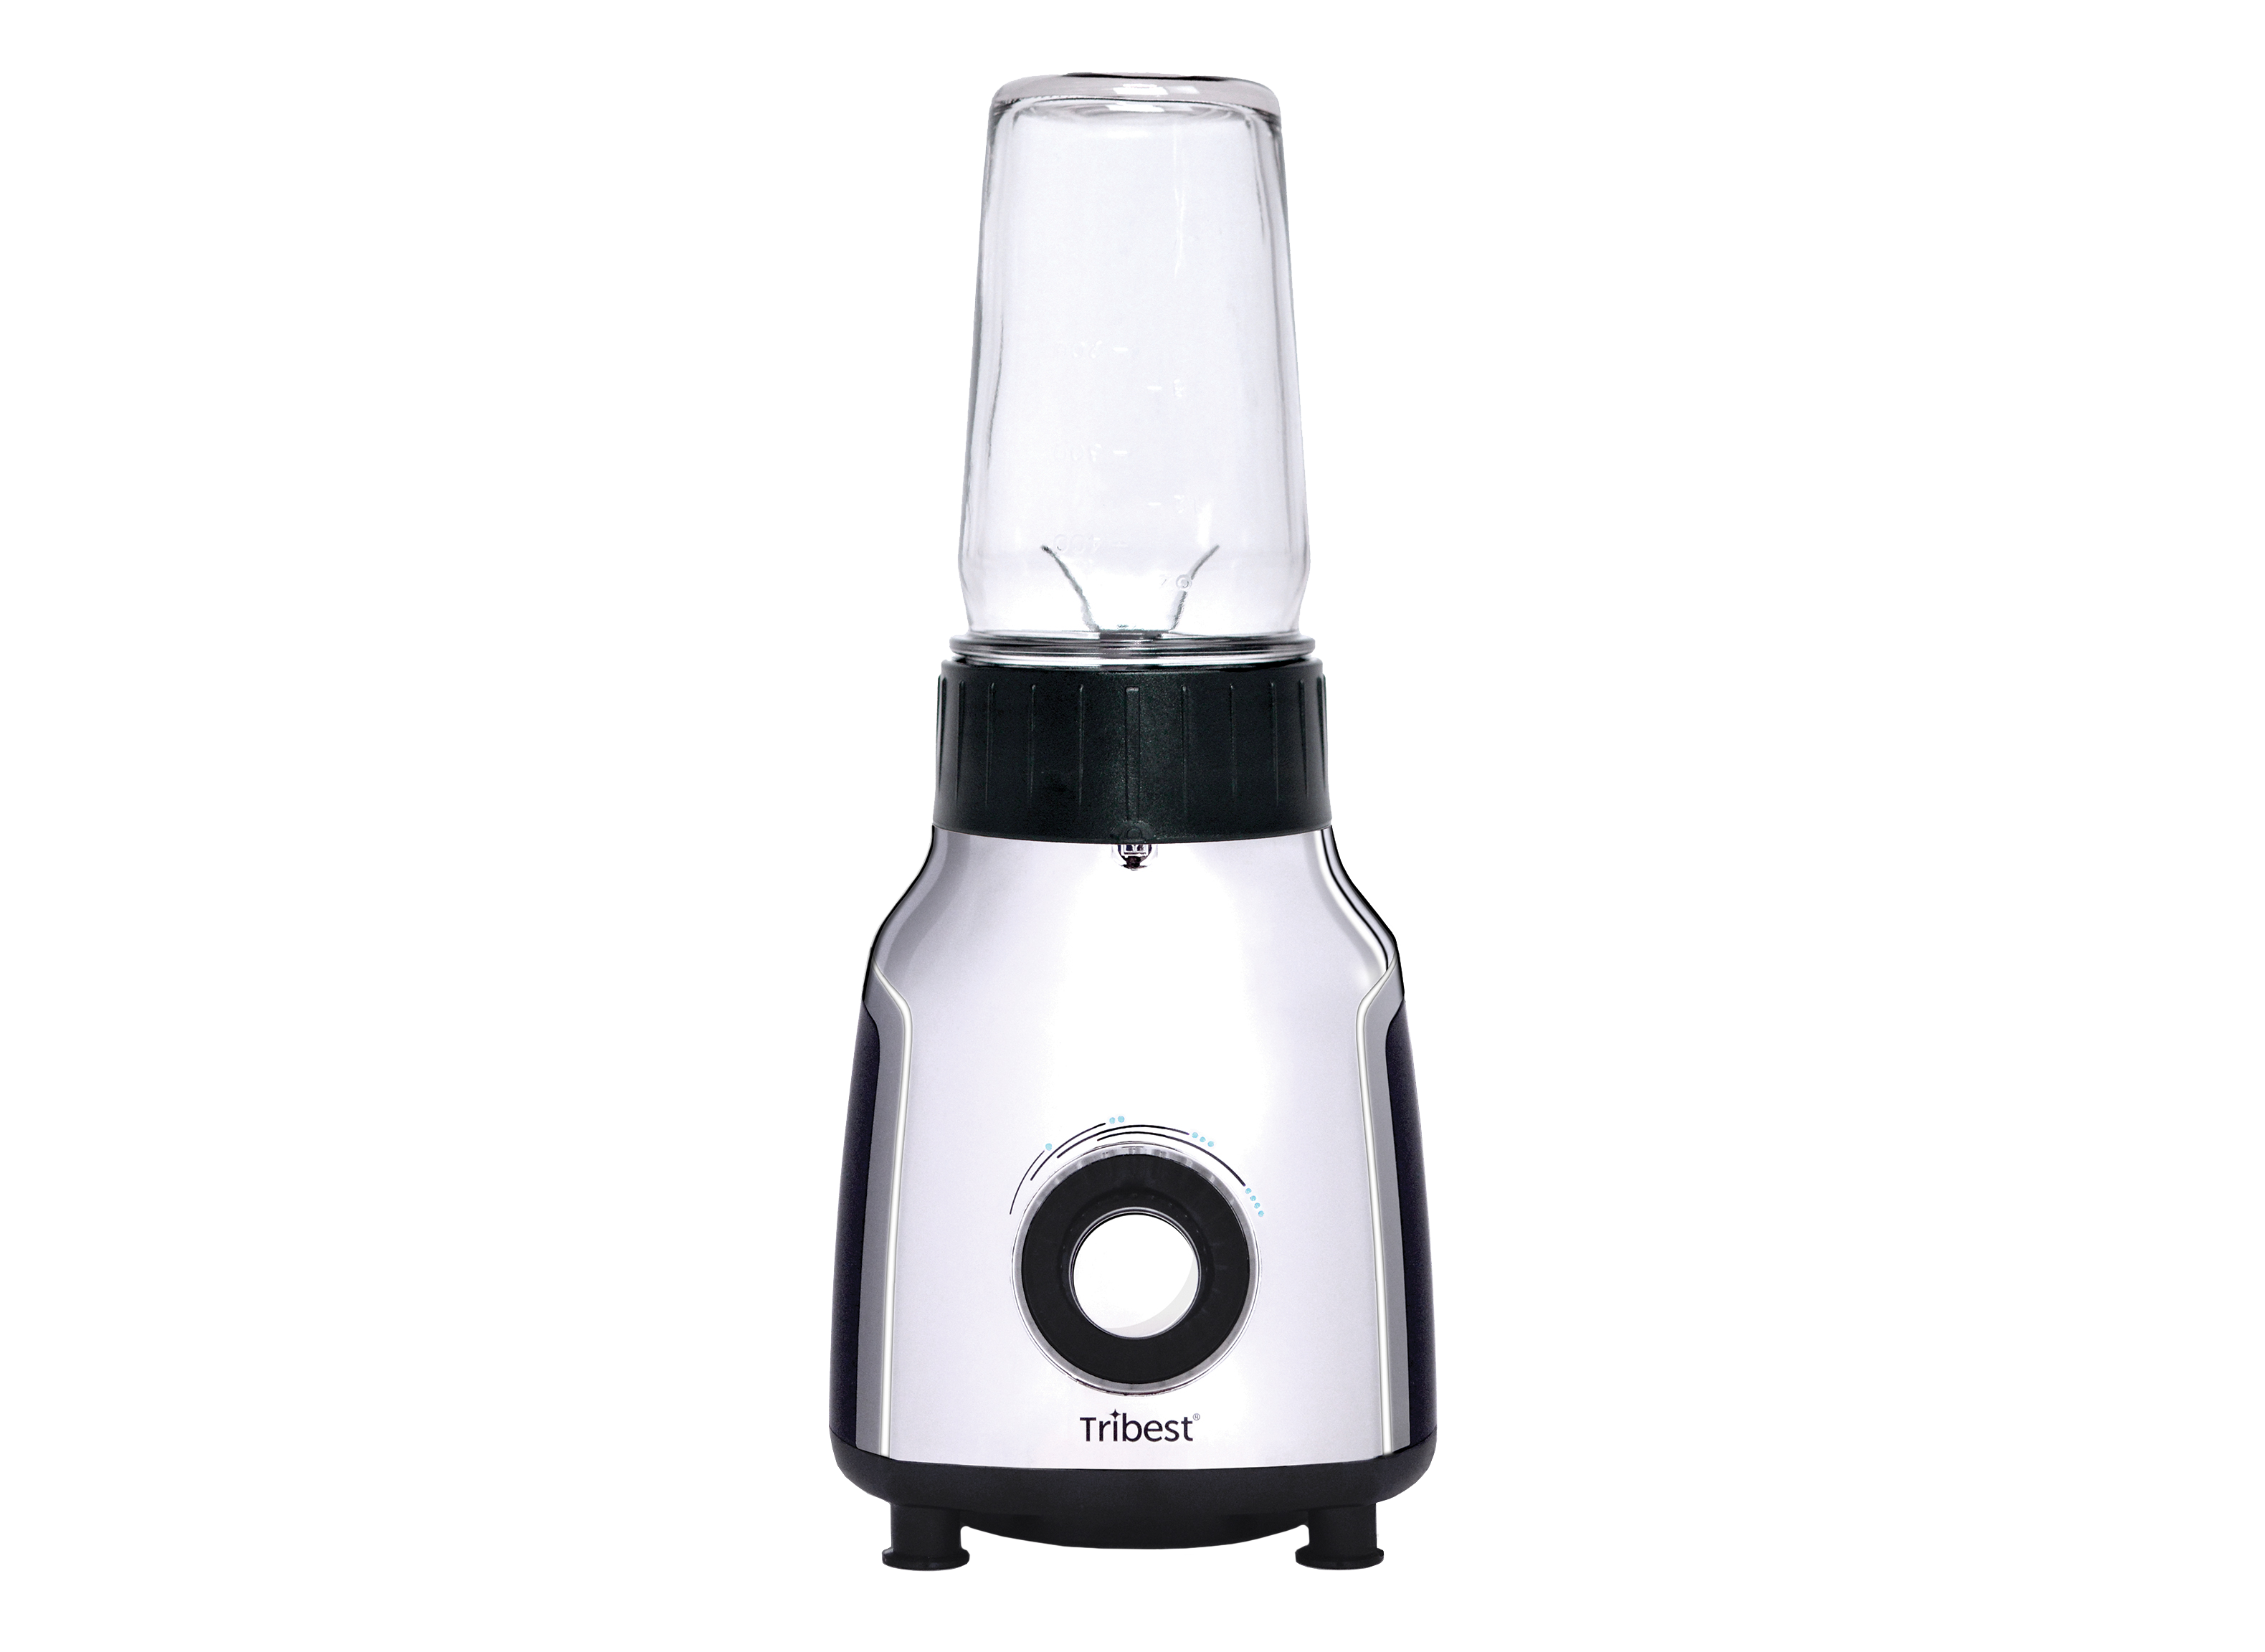 https://crdms.images.consumerreports.org/prod/products/cr/models/398951-personal-blenders-tribest-pbg-5050-a-glass-personal-10006599.png